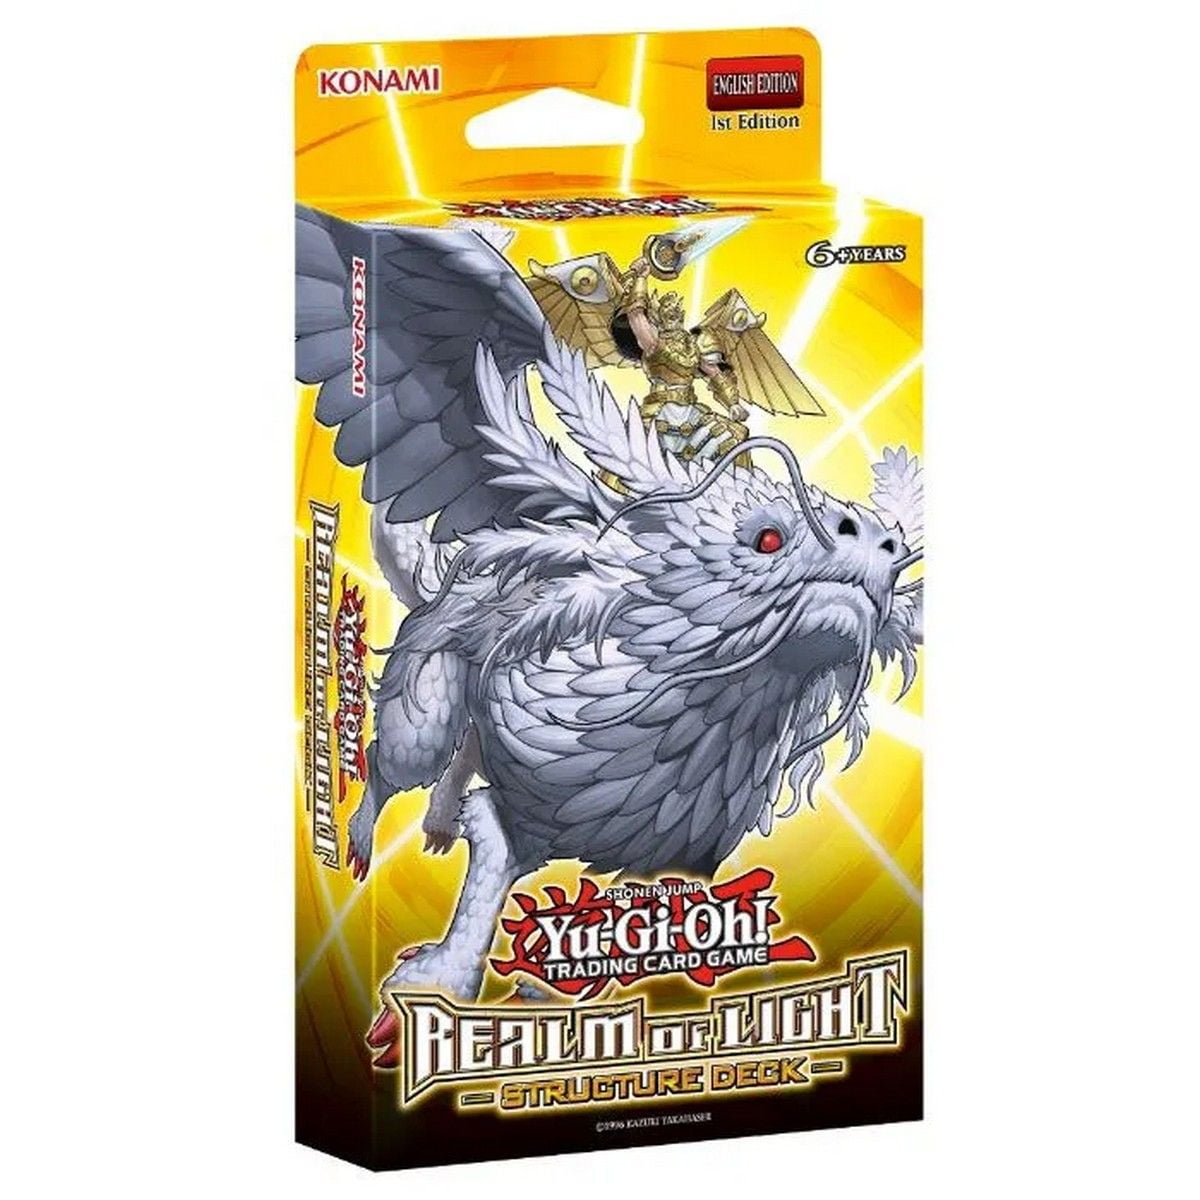 Yu-Gi-Oh! TCG: Structure Deck - Realm of Light